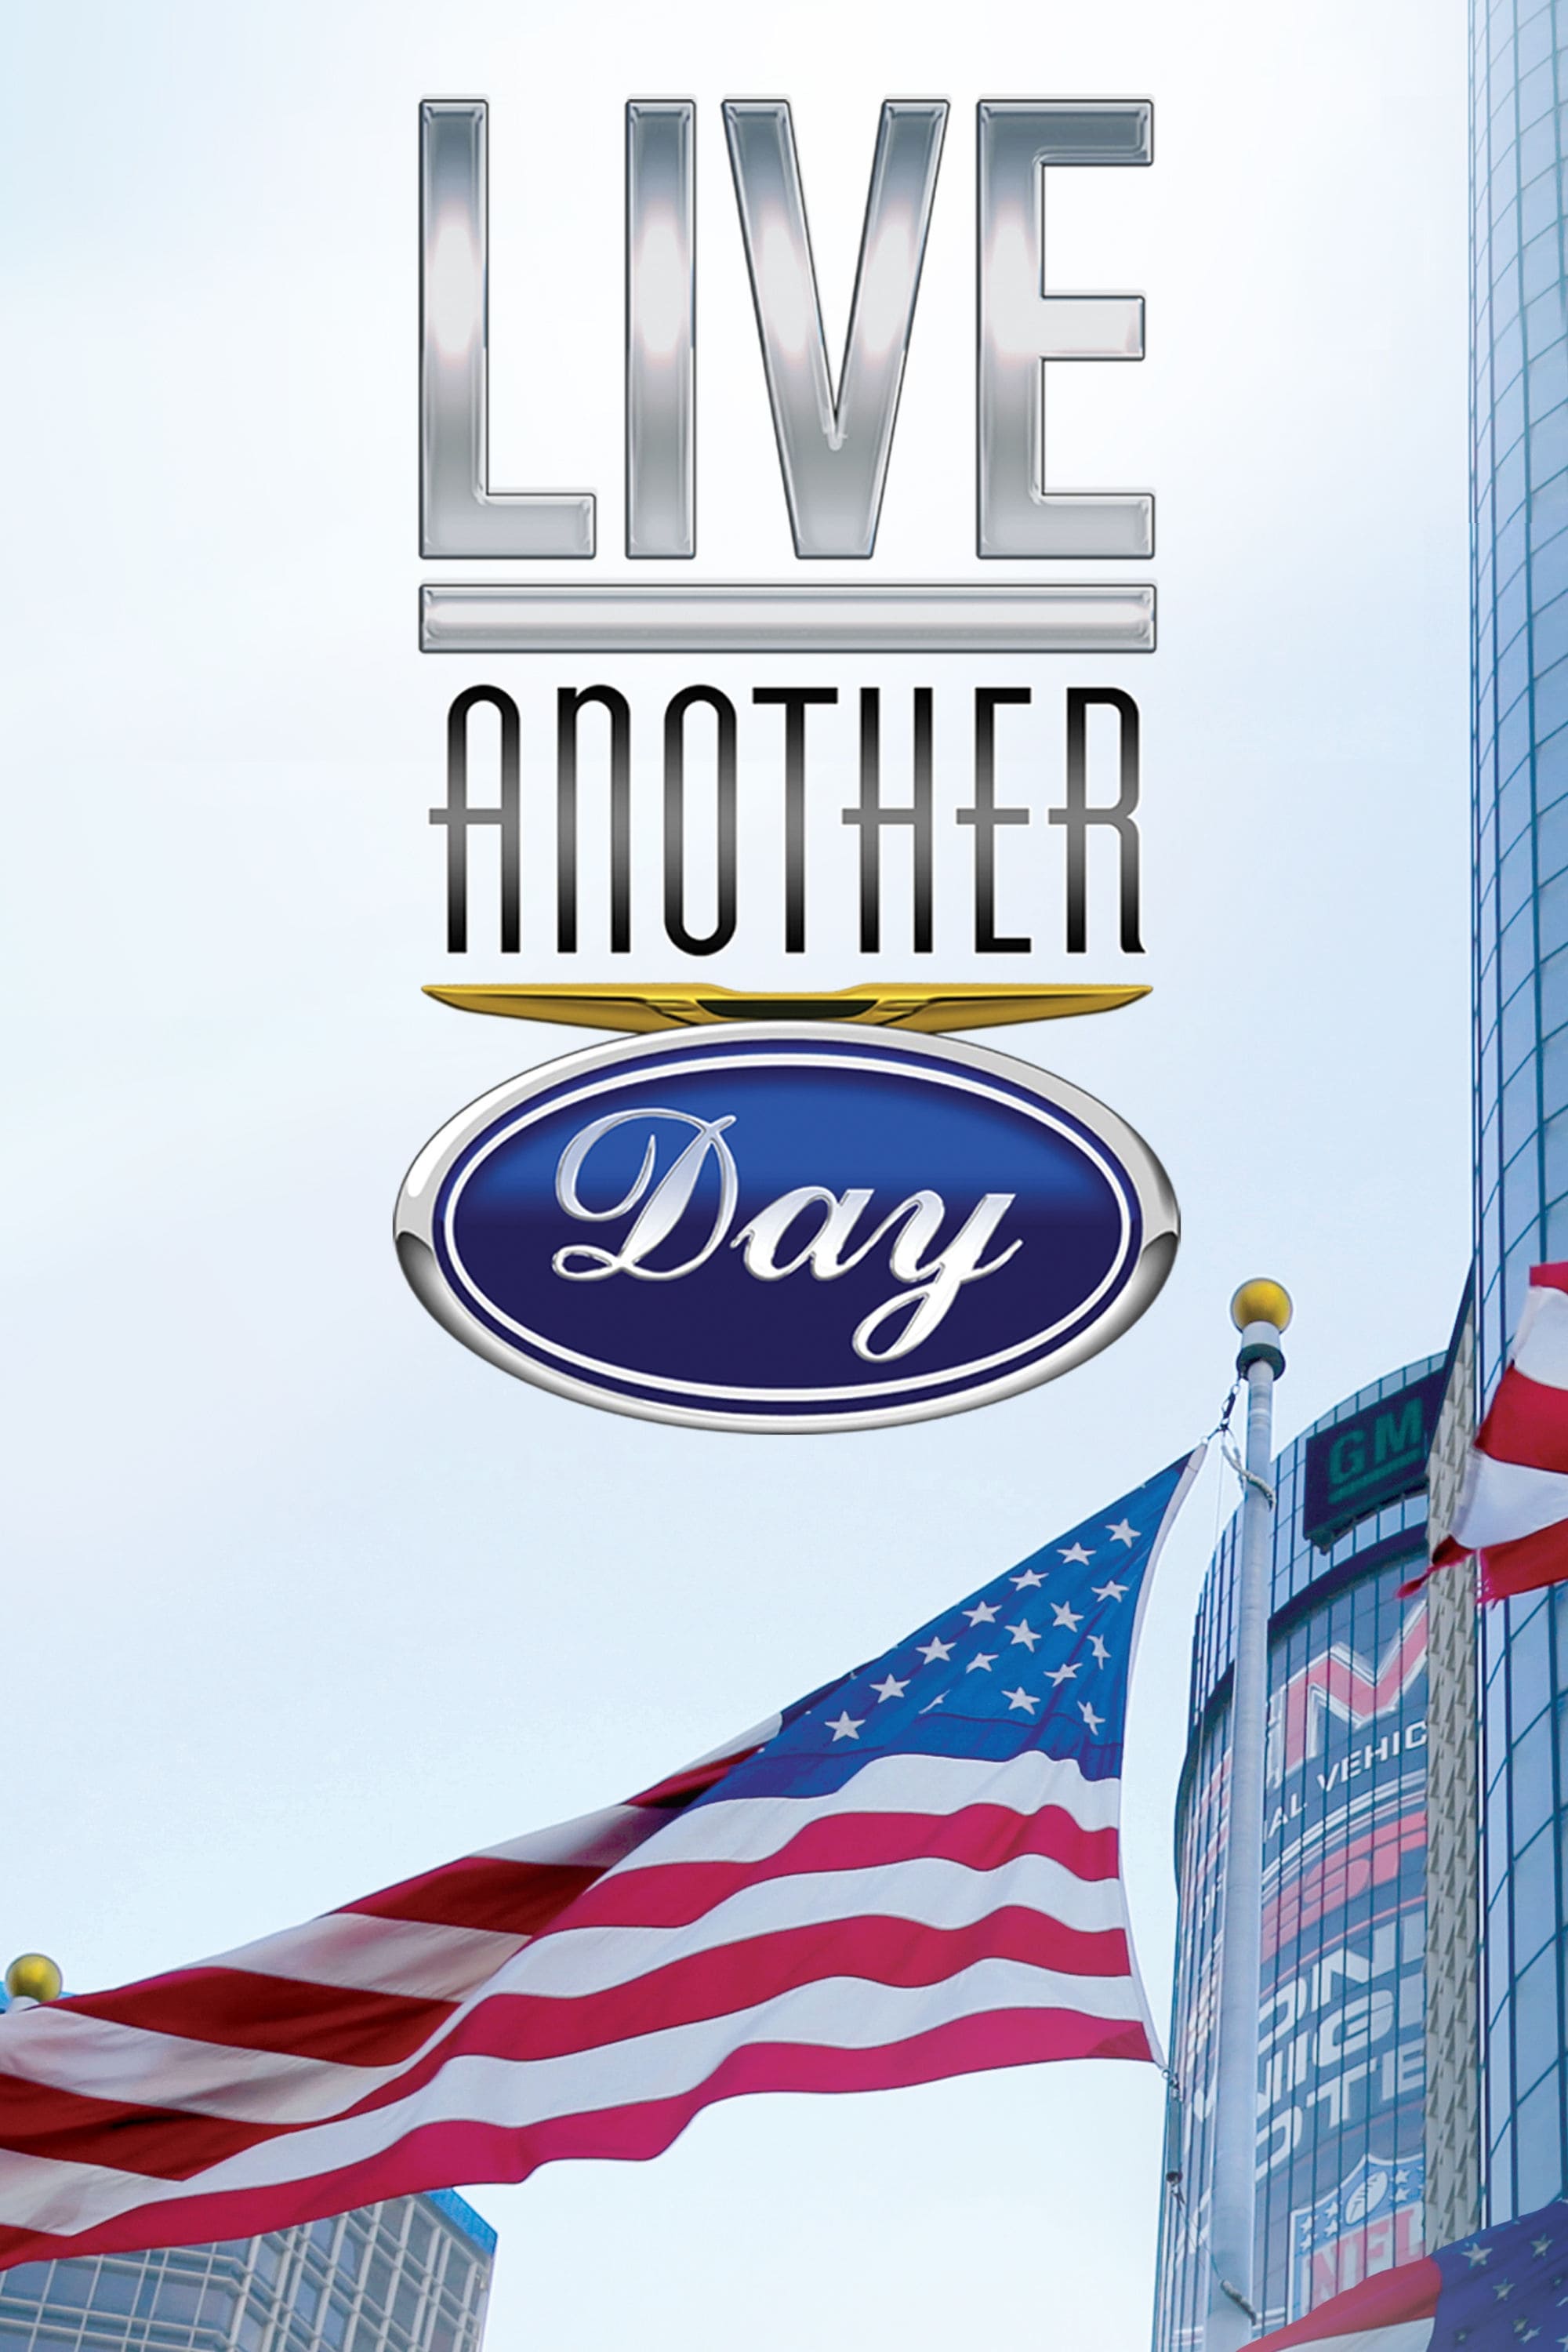 Live Another Day (2016)